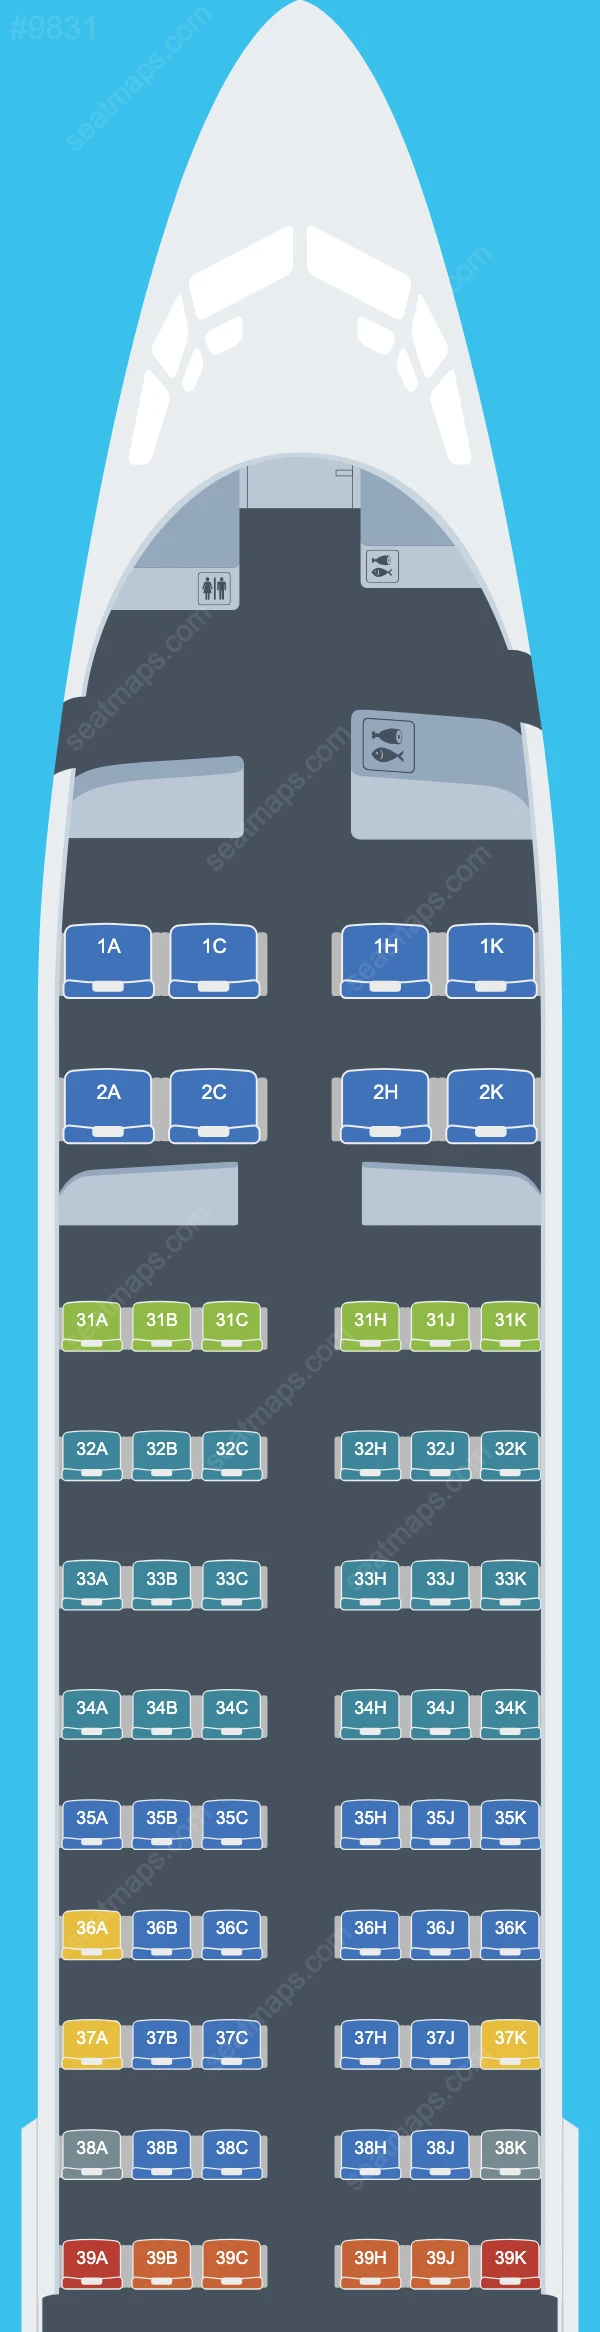 China Southern Boeing 737 Seat Maps 737-800 V.2